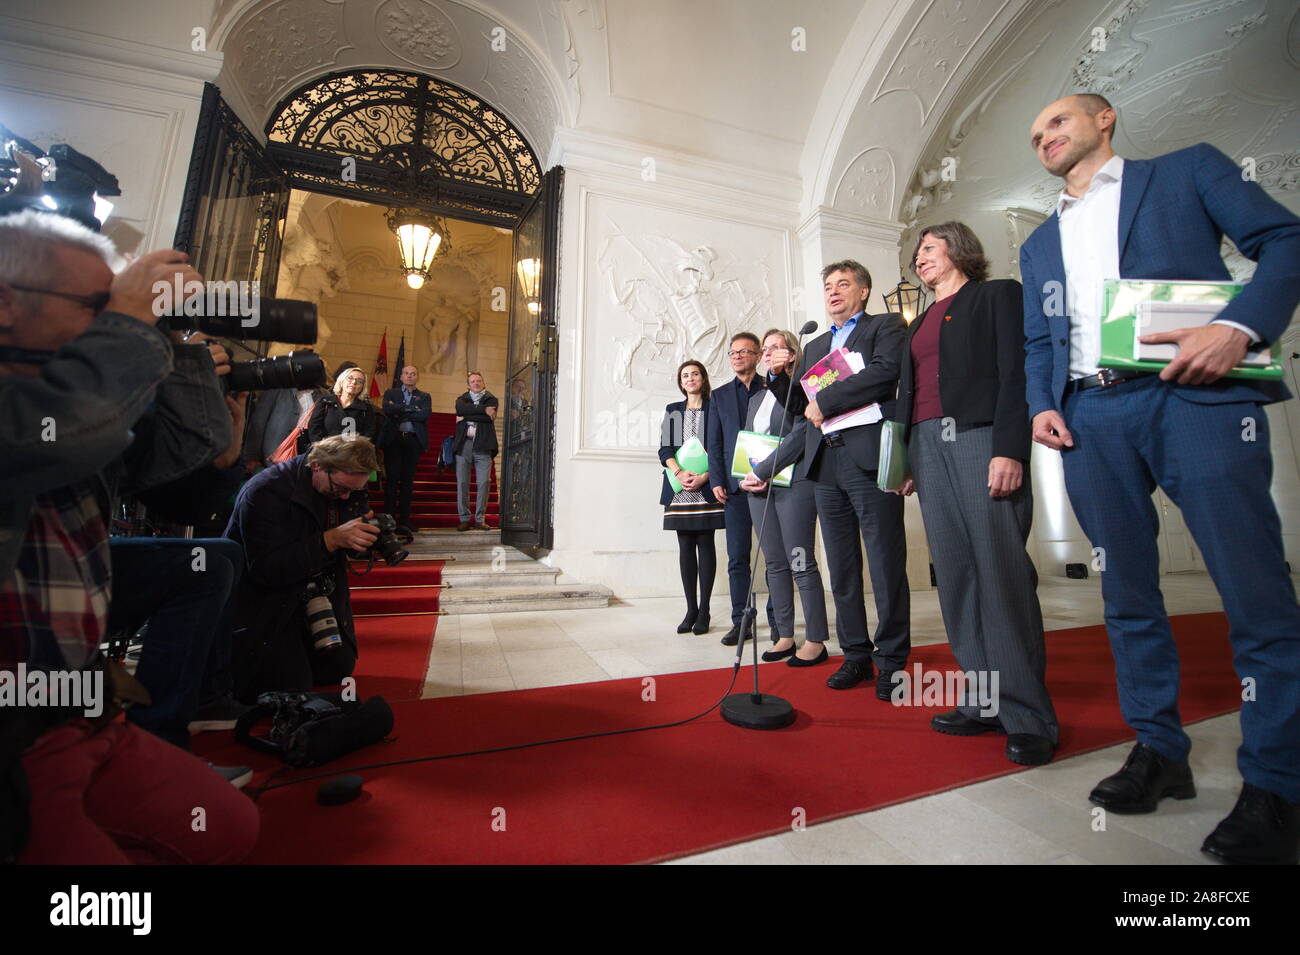 Vienna, Austria. 08th November, 2019. Chairman and national spokesman of the Green Party (center) Werner Kogler and his Team on the occasion of an exploratory talk to evaluate possibilities for coalition building by ÖVP and the Green Party at Winterpalais Prinz Eugen, Himmelpfortgasse 8 on November 5, 2019 in Vienna. Picture shows (from L to R) Alma Zadic, Rudi Anschober, Leonore Gewessler, Werner Kogler, Birgit Hebein and Josef Meichenitsch. Credit: Franz Perc/Alamy Live News Stock Photo